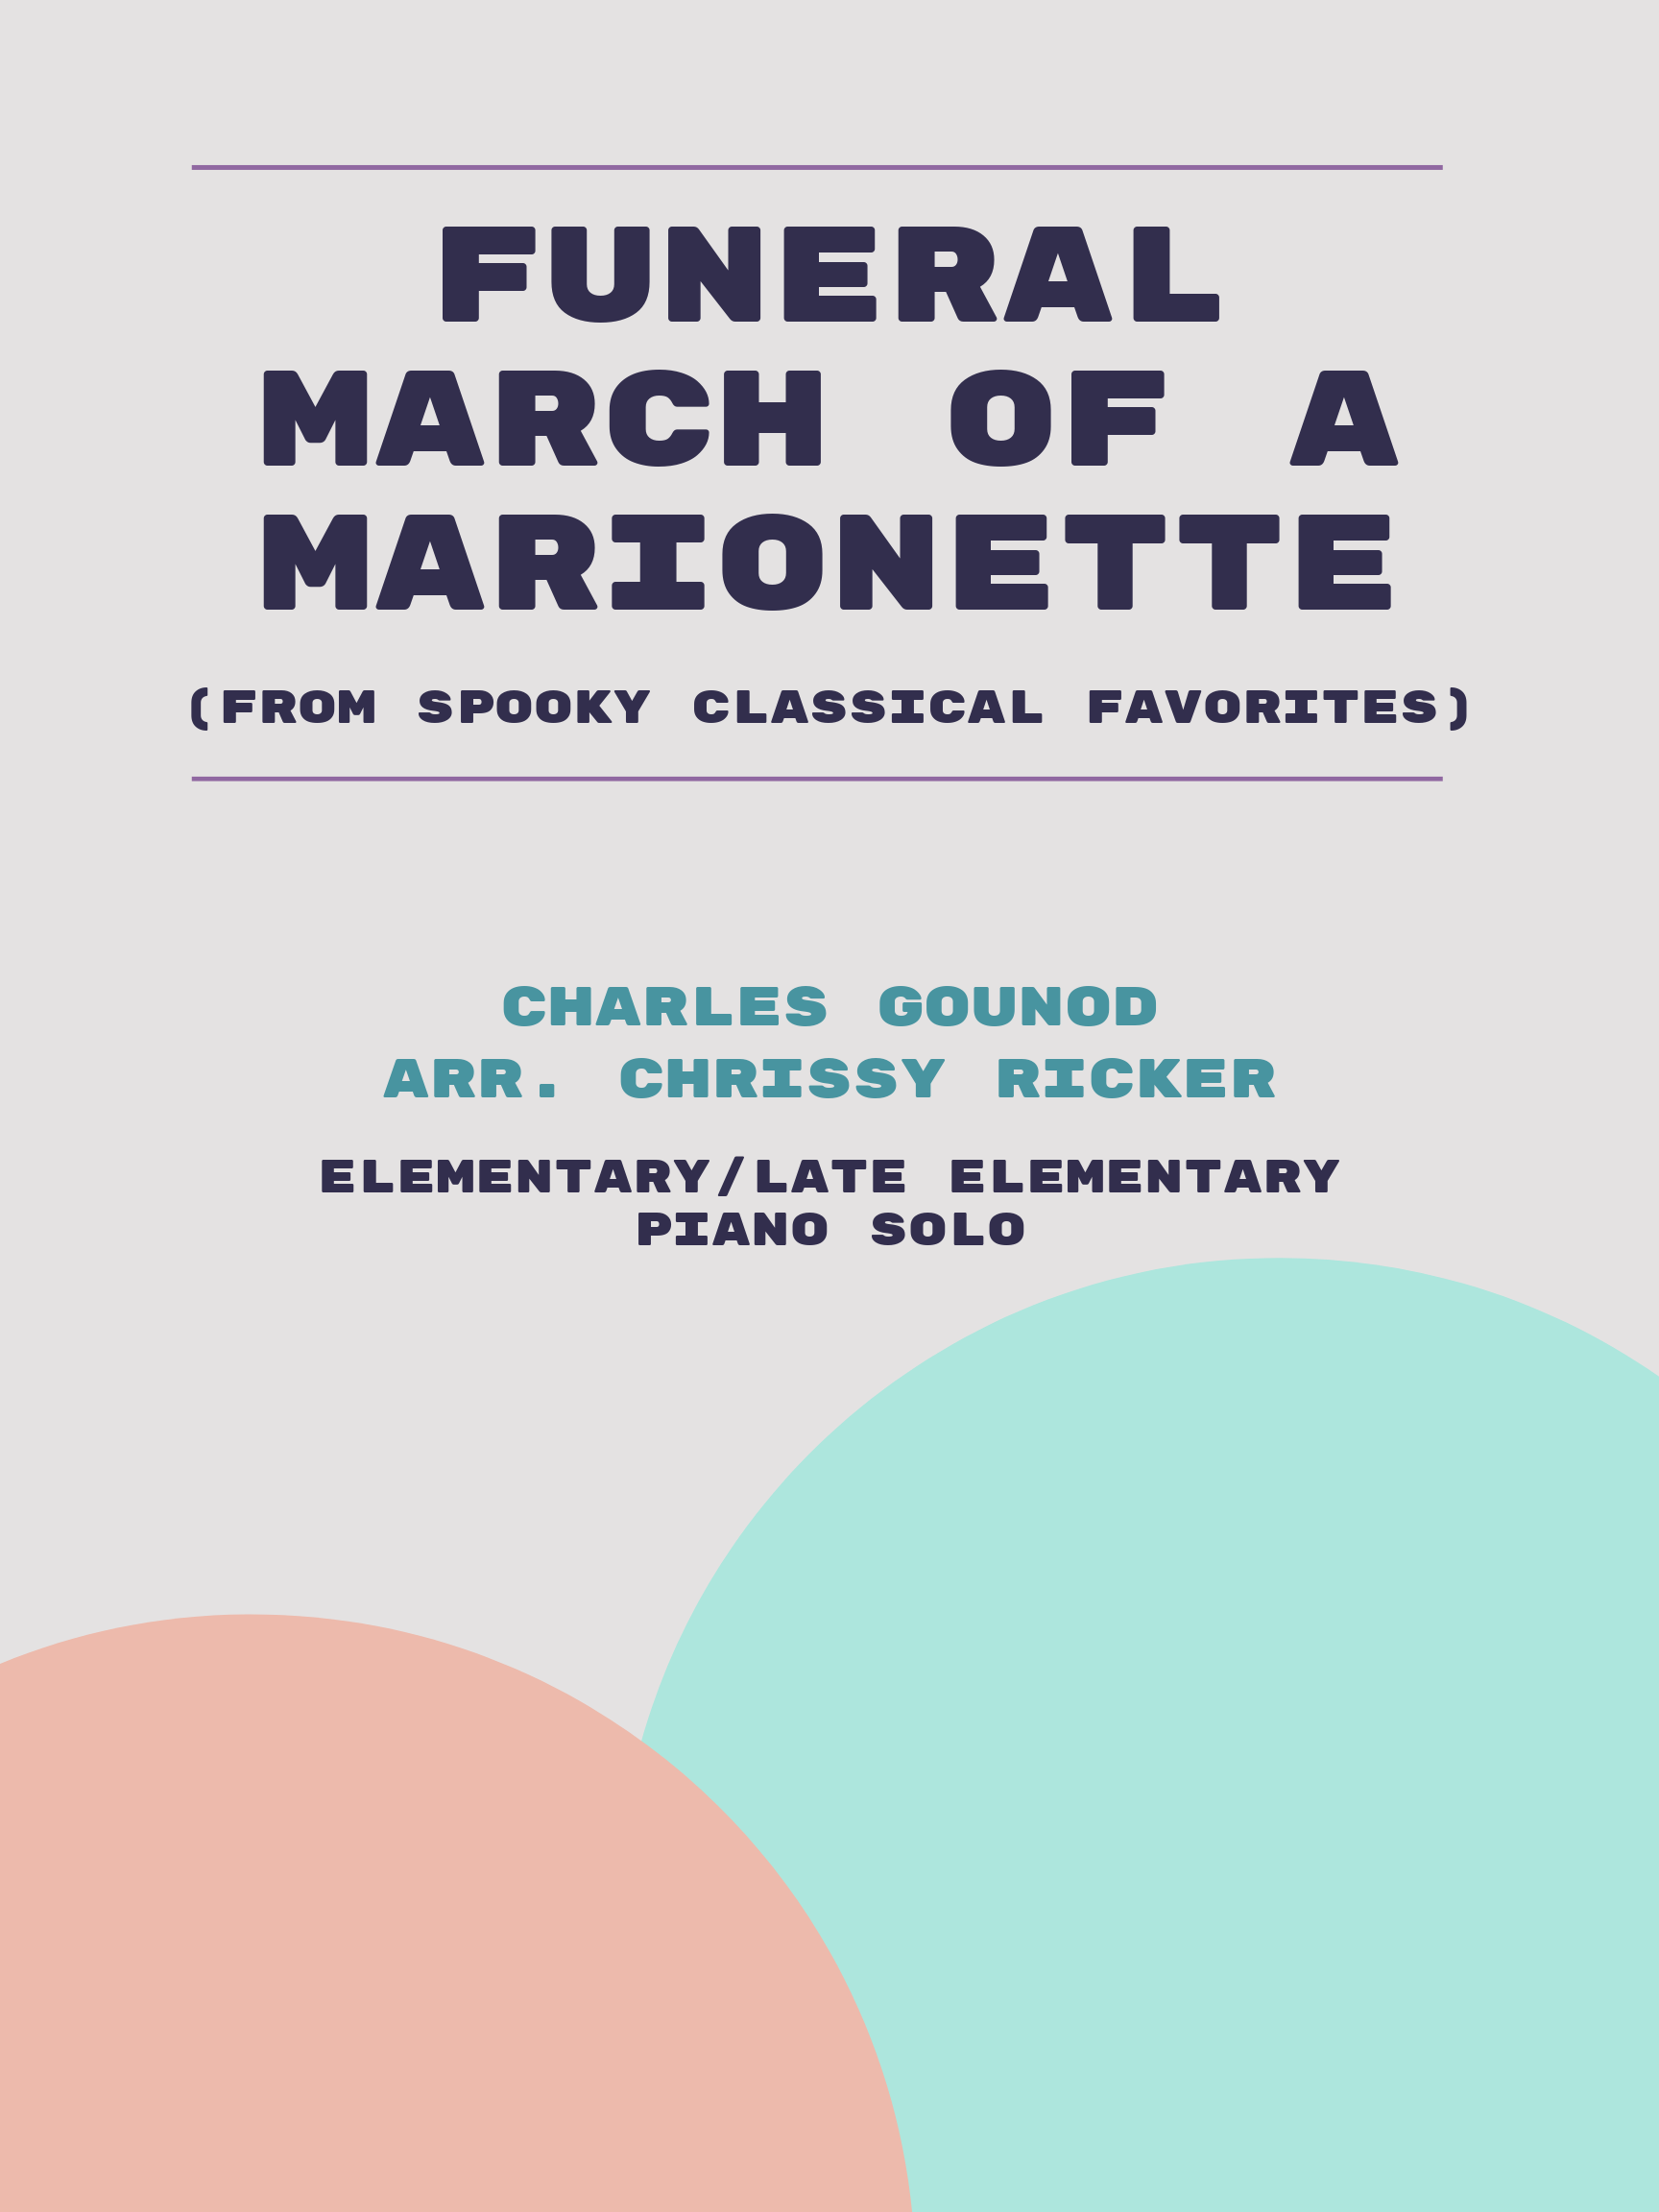 Funeral March of a Marionette by Charles Gounod